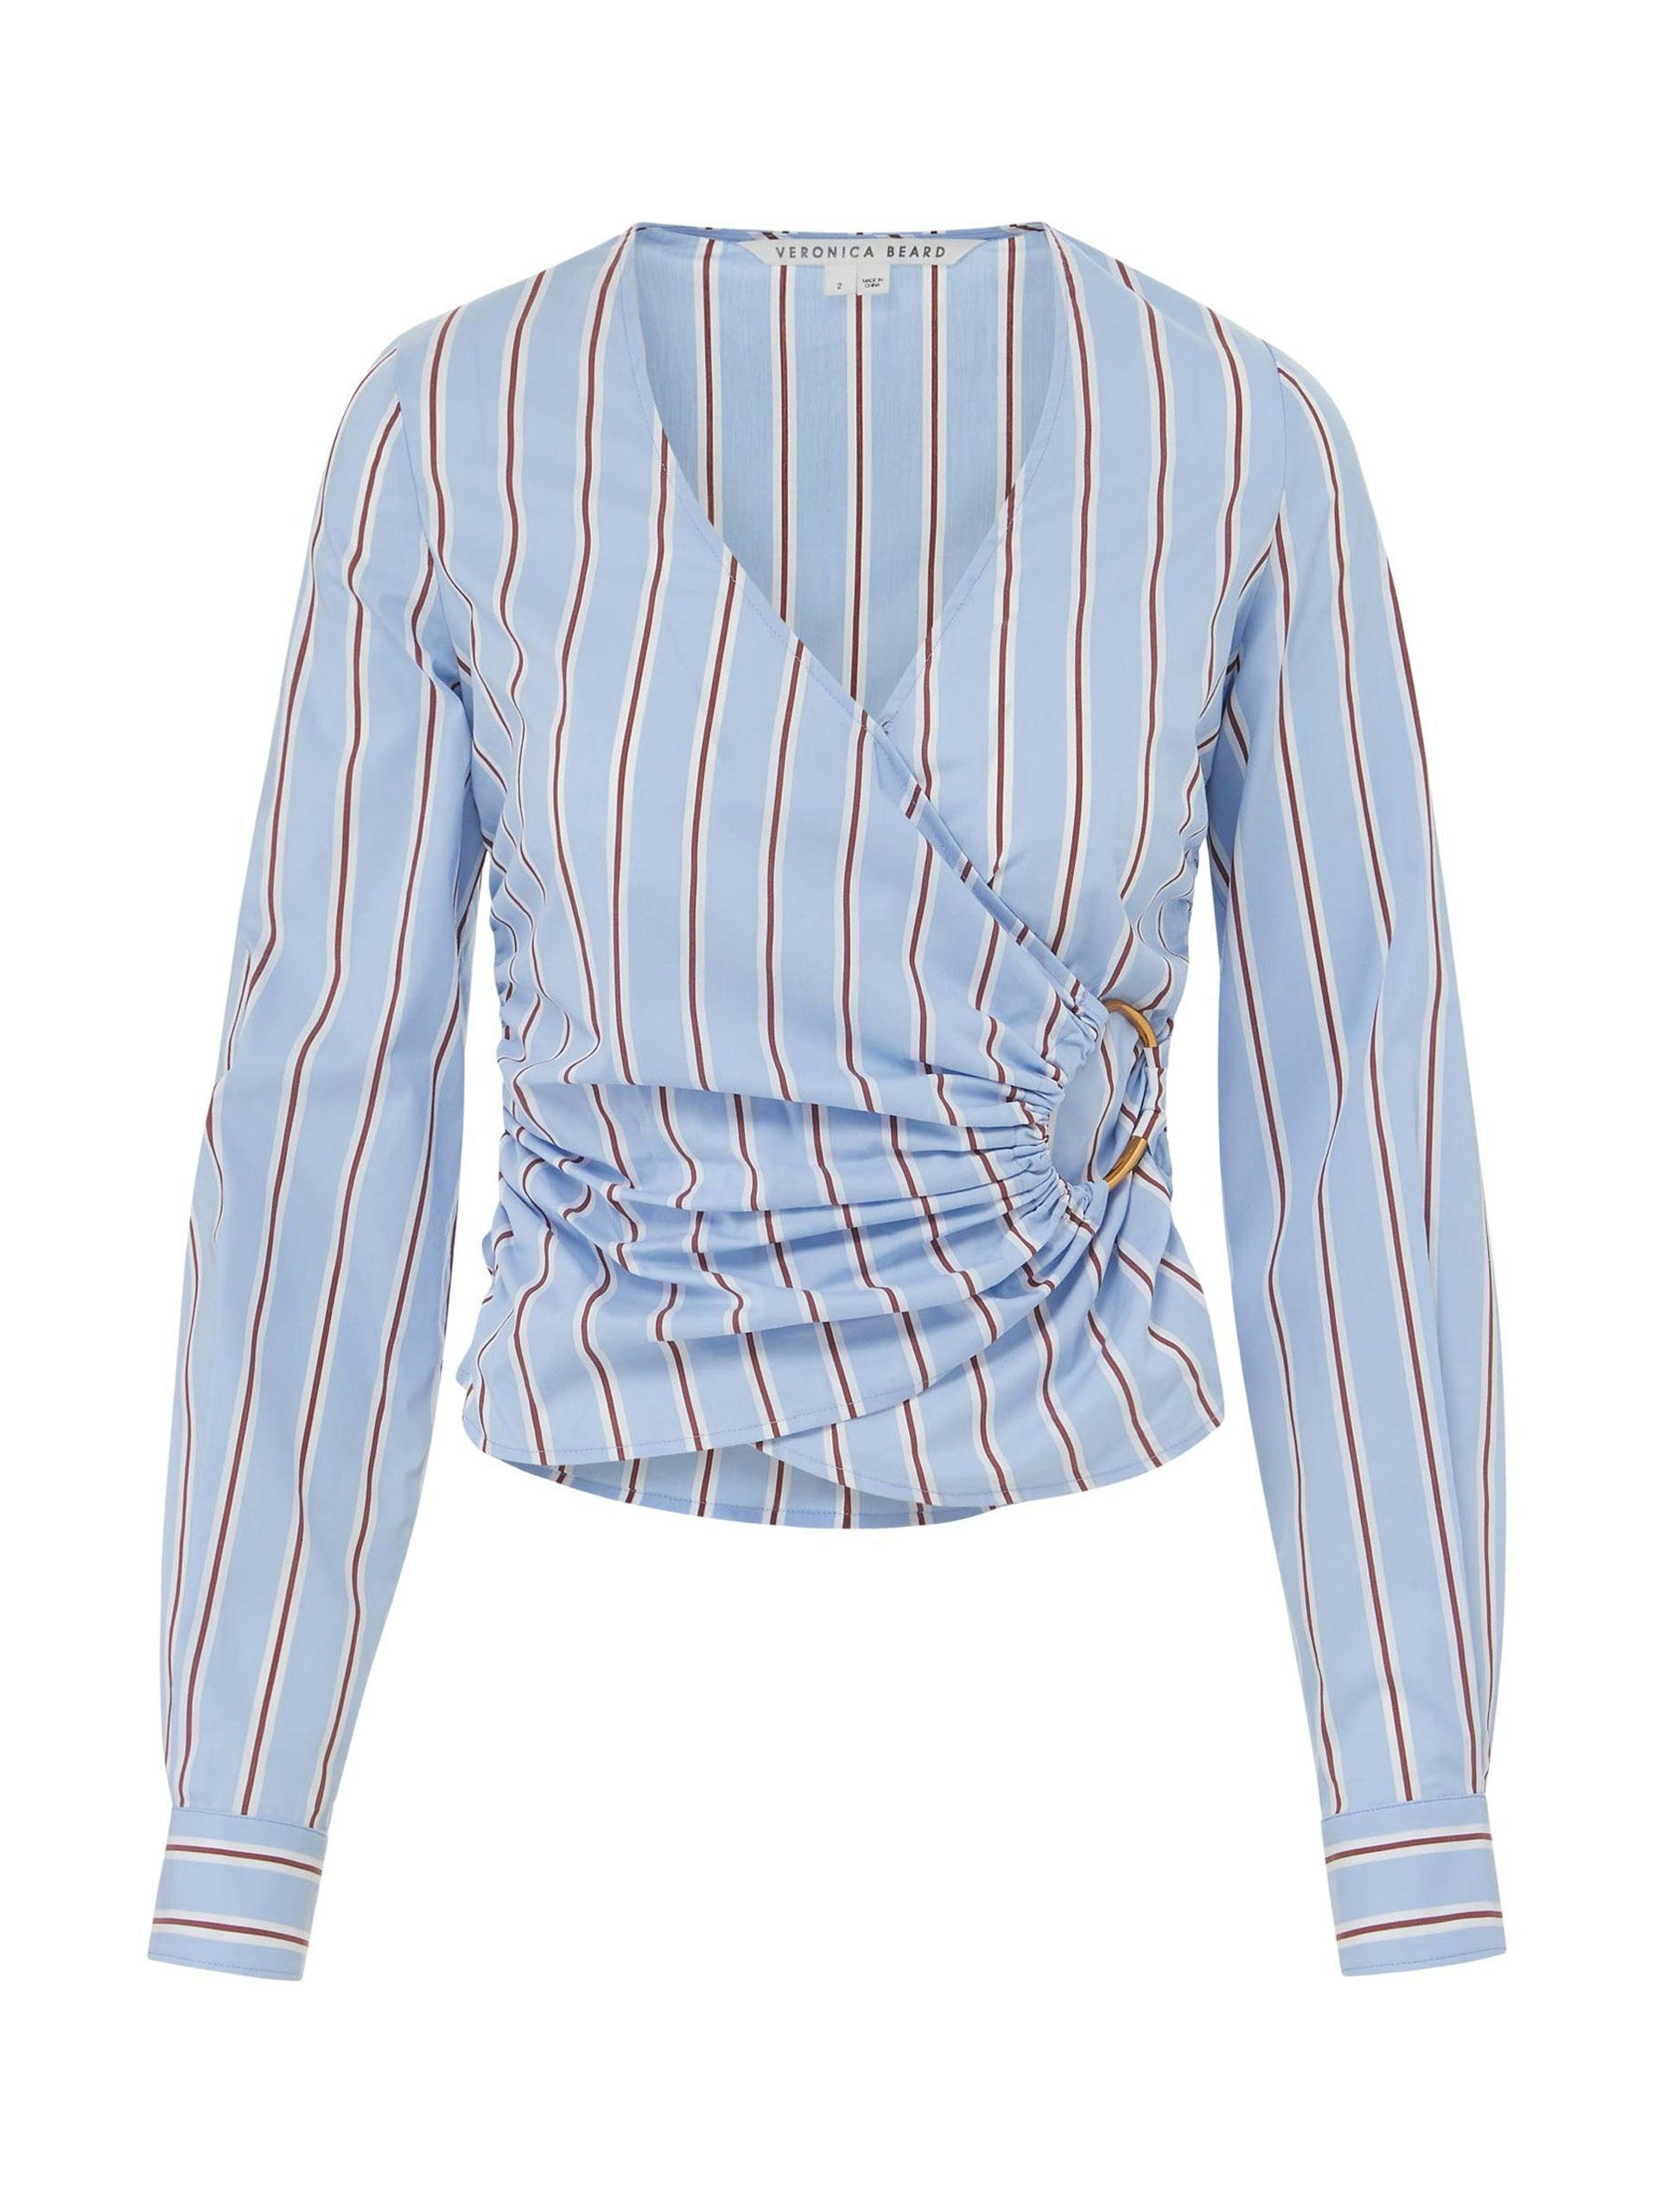 Blue striped wrap top with gold buckle